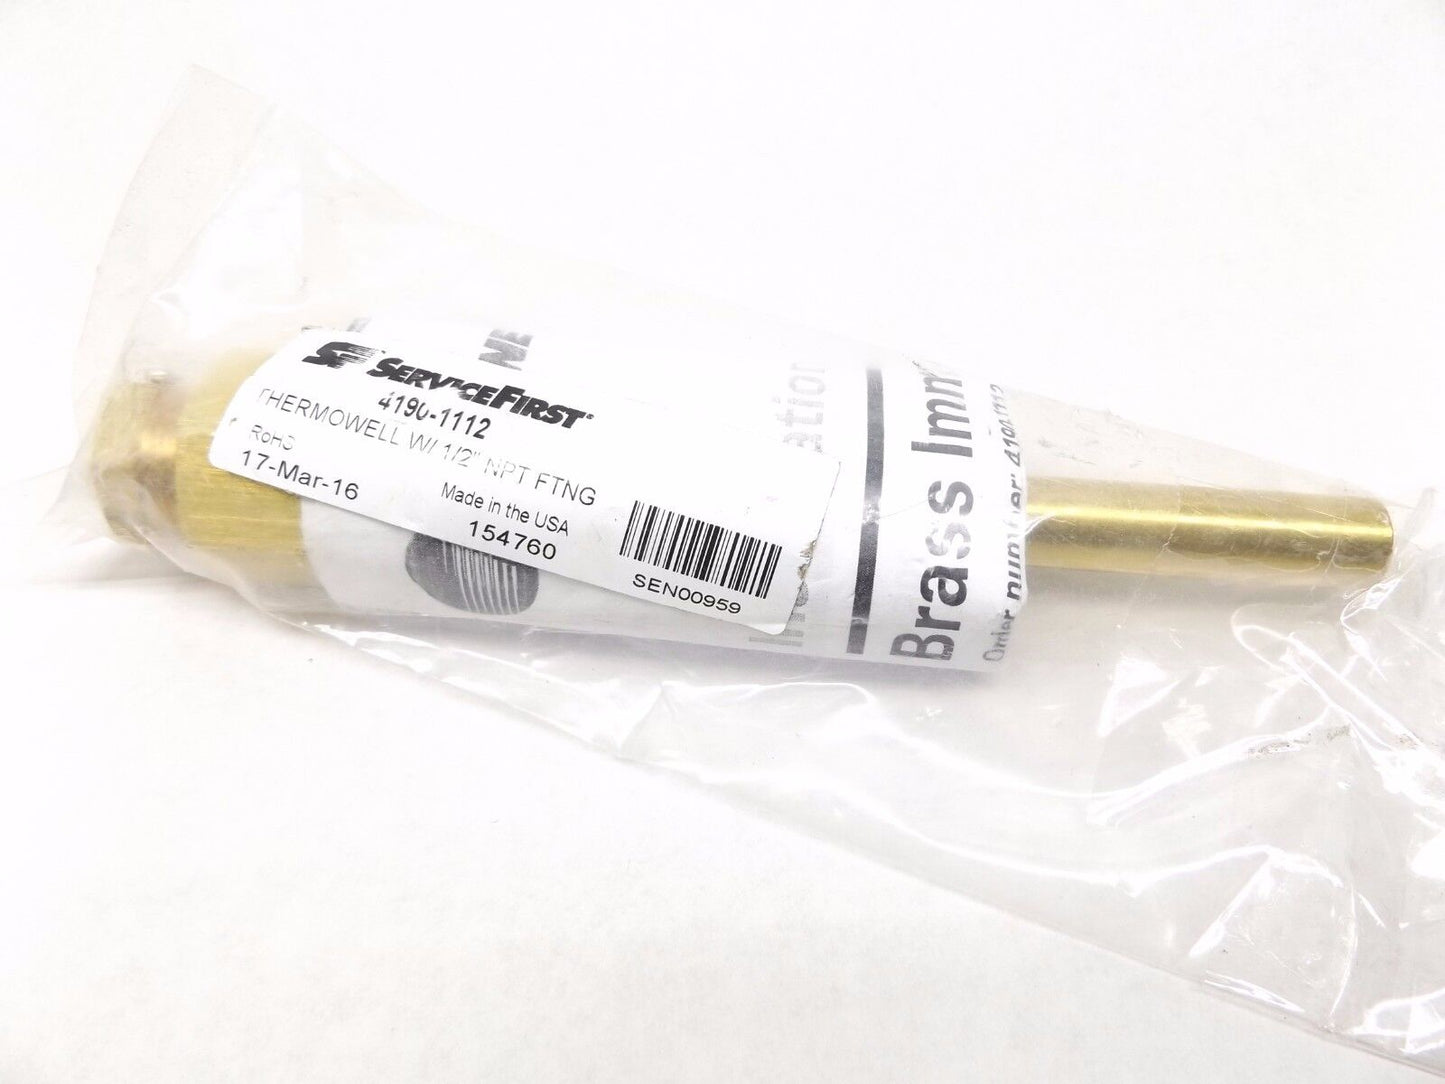 SERVICE FIRST 4190-1112 THERMOWELL WITH 1/2" NPT FITTING SEN00959